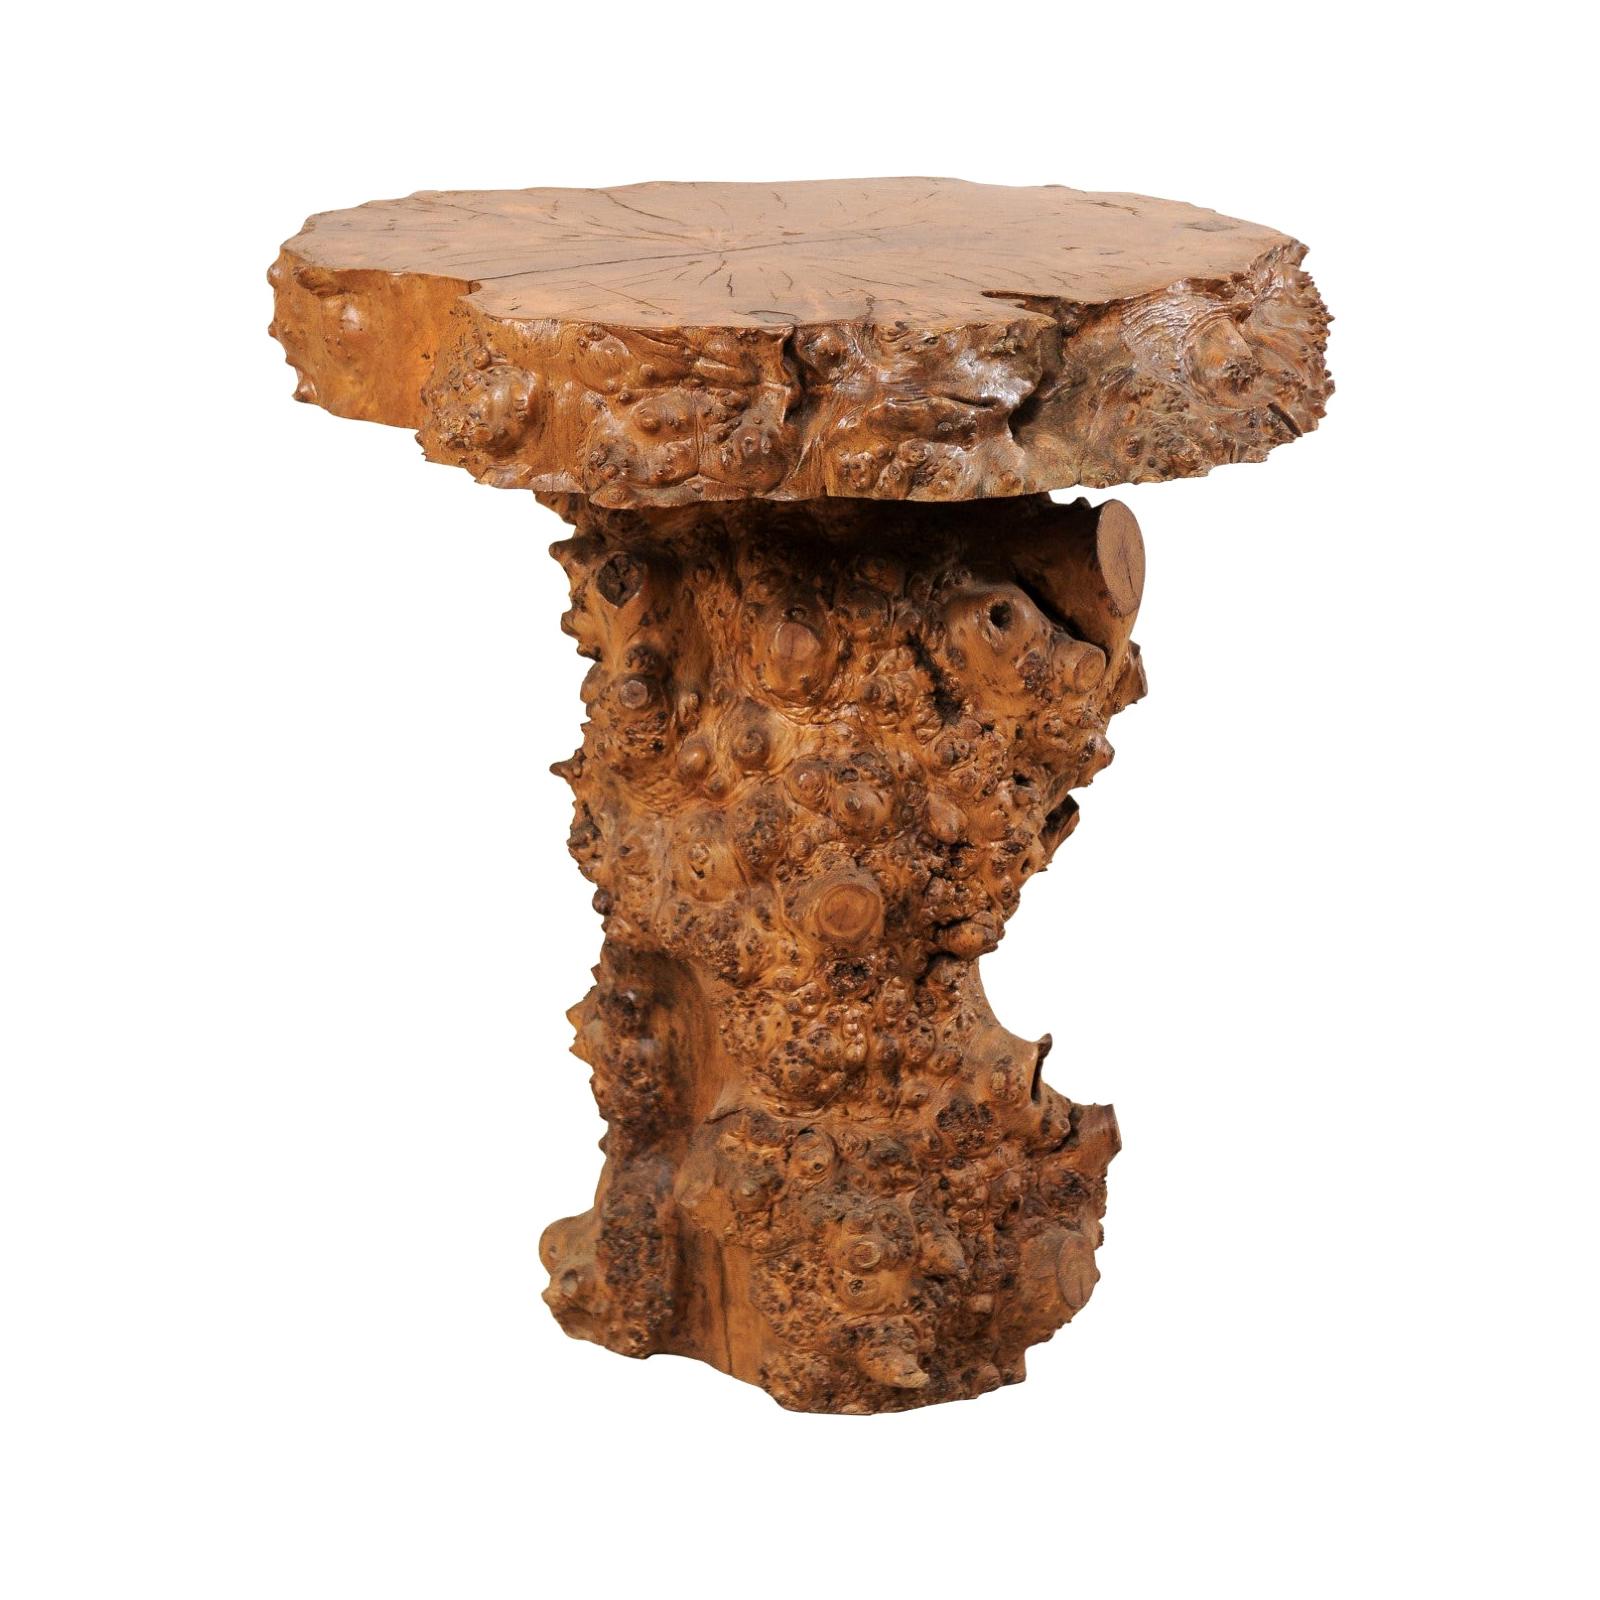 European Live-Edge Burl Side Table with Slab Top & Knobby Texture, Early 20th C. For Sale